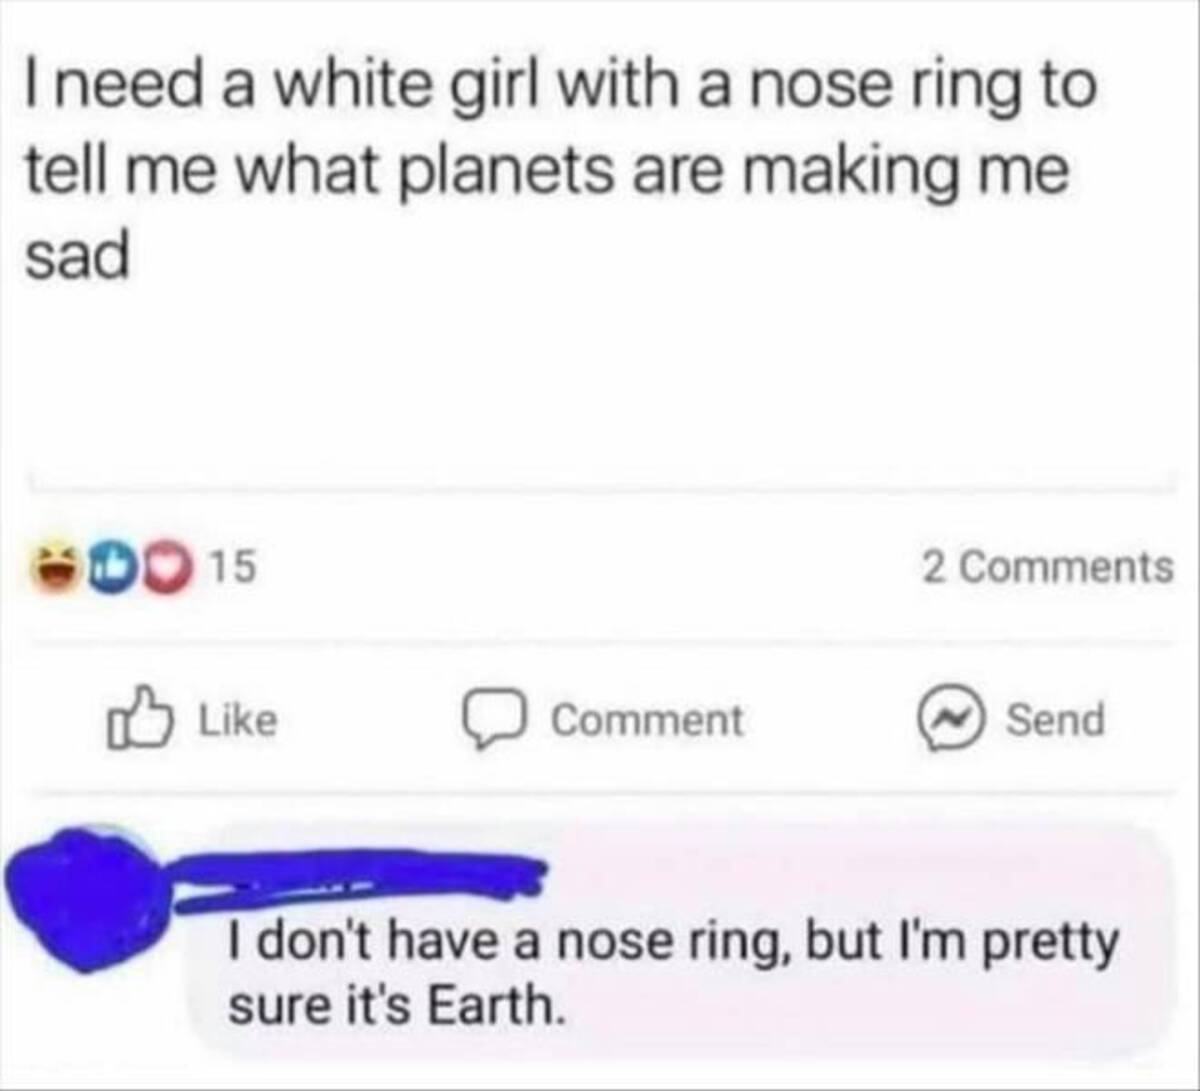 screenshot - I need a white girl with a nose ring to tell me what planets are making me sad 0015 Comment 2 Send I don't have a nose ring, but I'm pretty sure it's Earth.